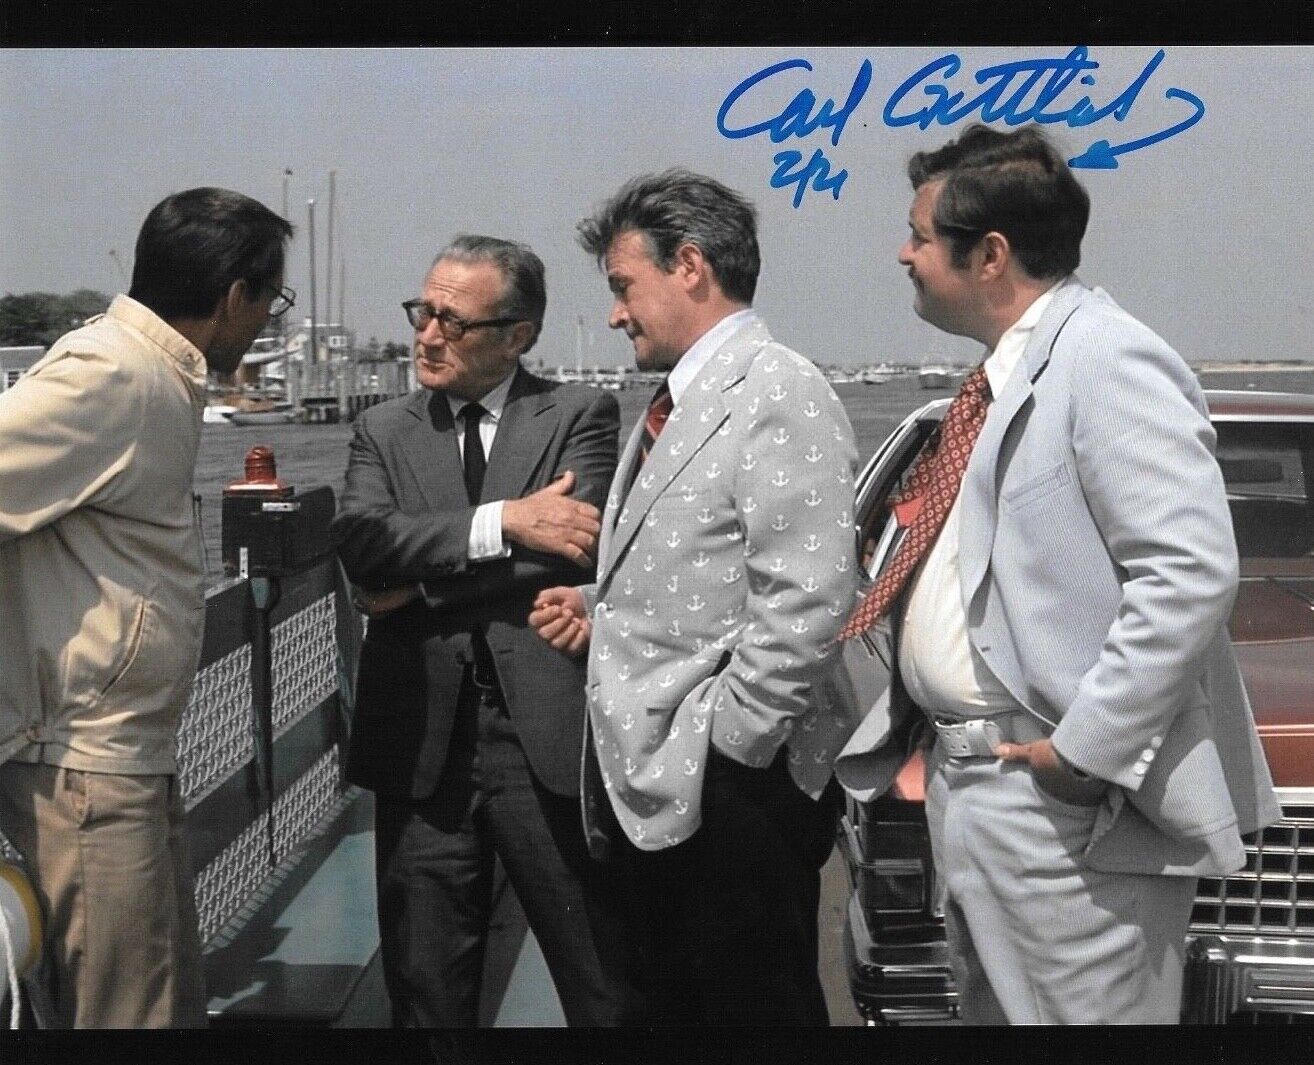 * CARL GOTTLIEB * signed 8x10 Photo Poster painting * JAWS * PROOF * COA * 7